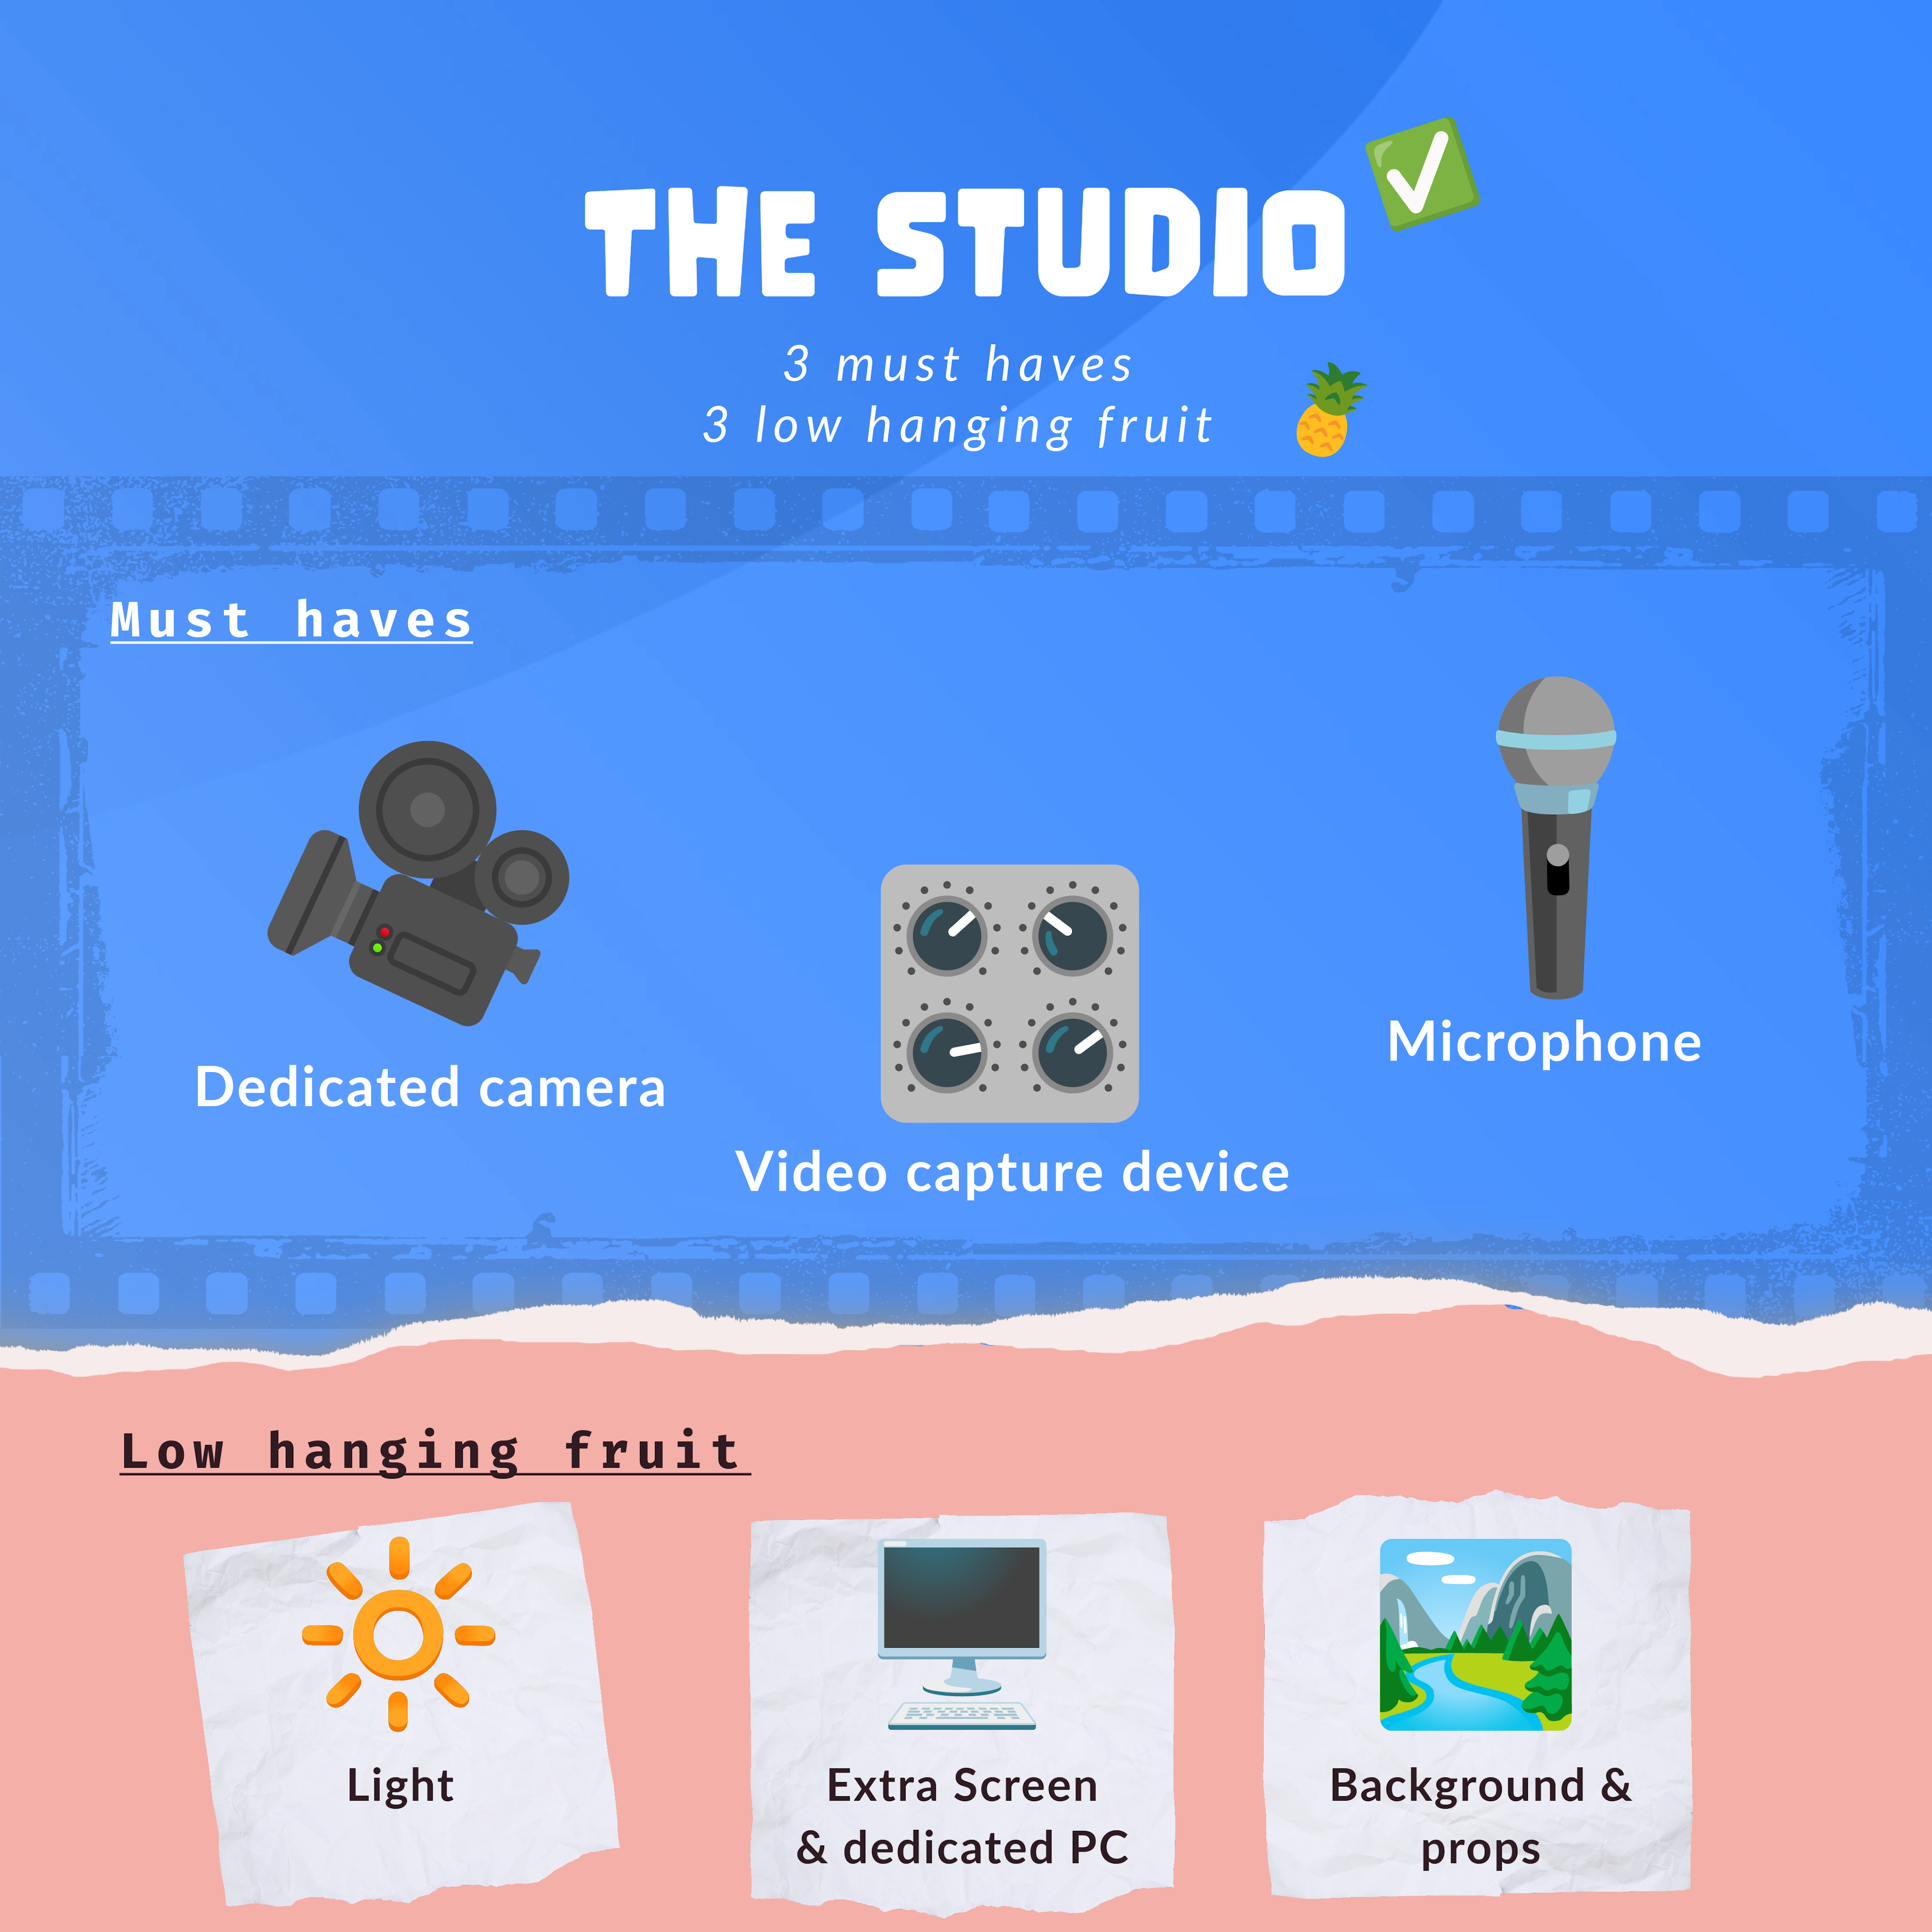 6 important aspects of a studio for webinar production. 3 are must have aspects in order to stream while the other 3 are low hanging fruits, raising the video production significantly.